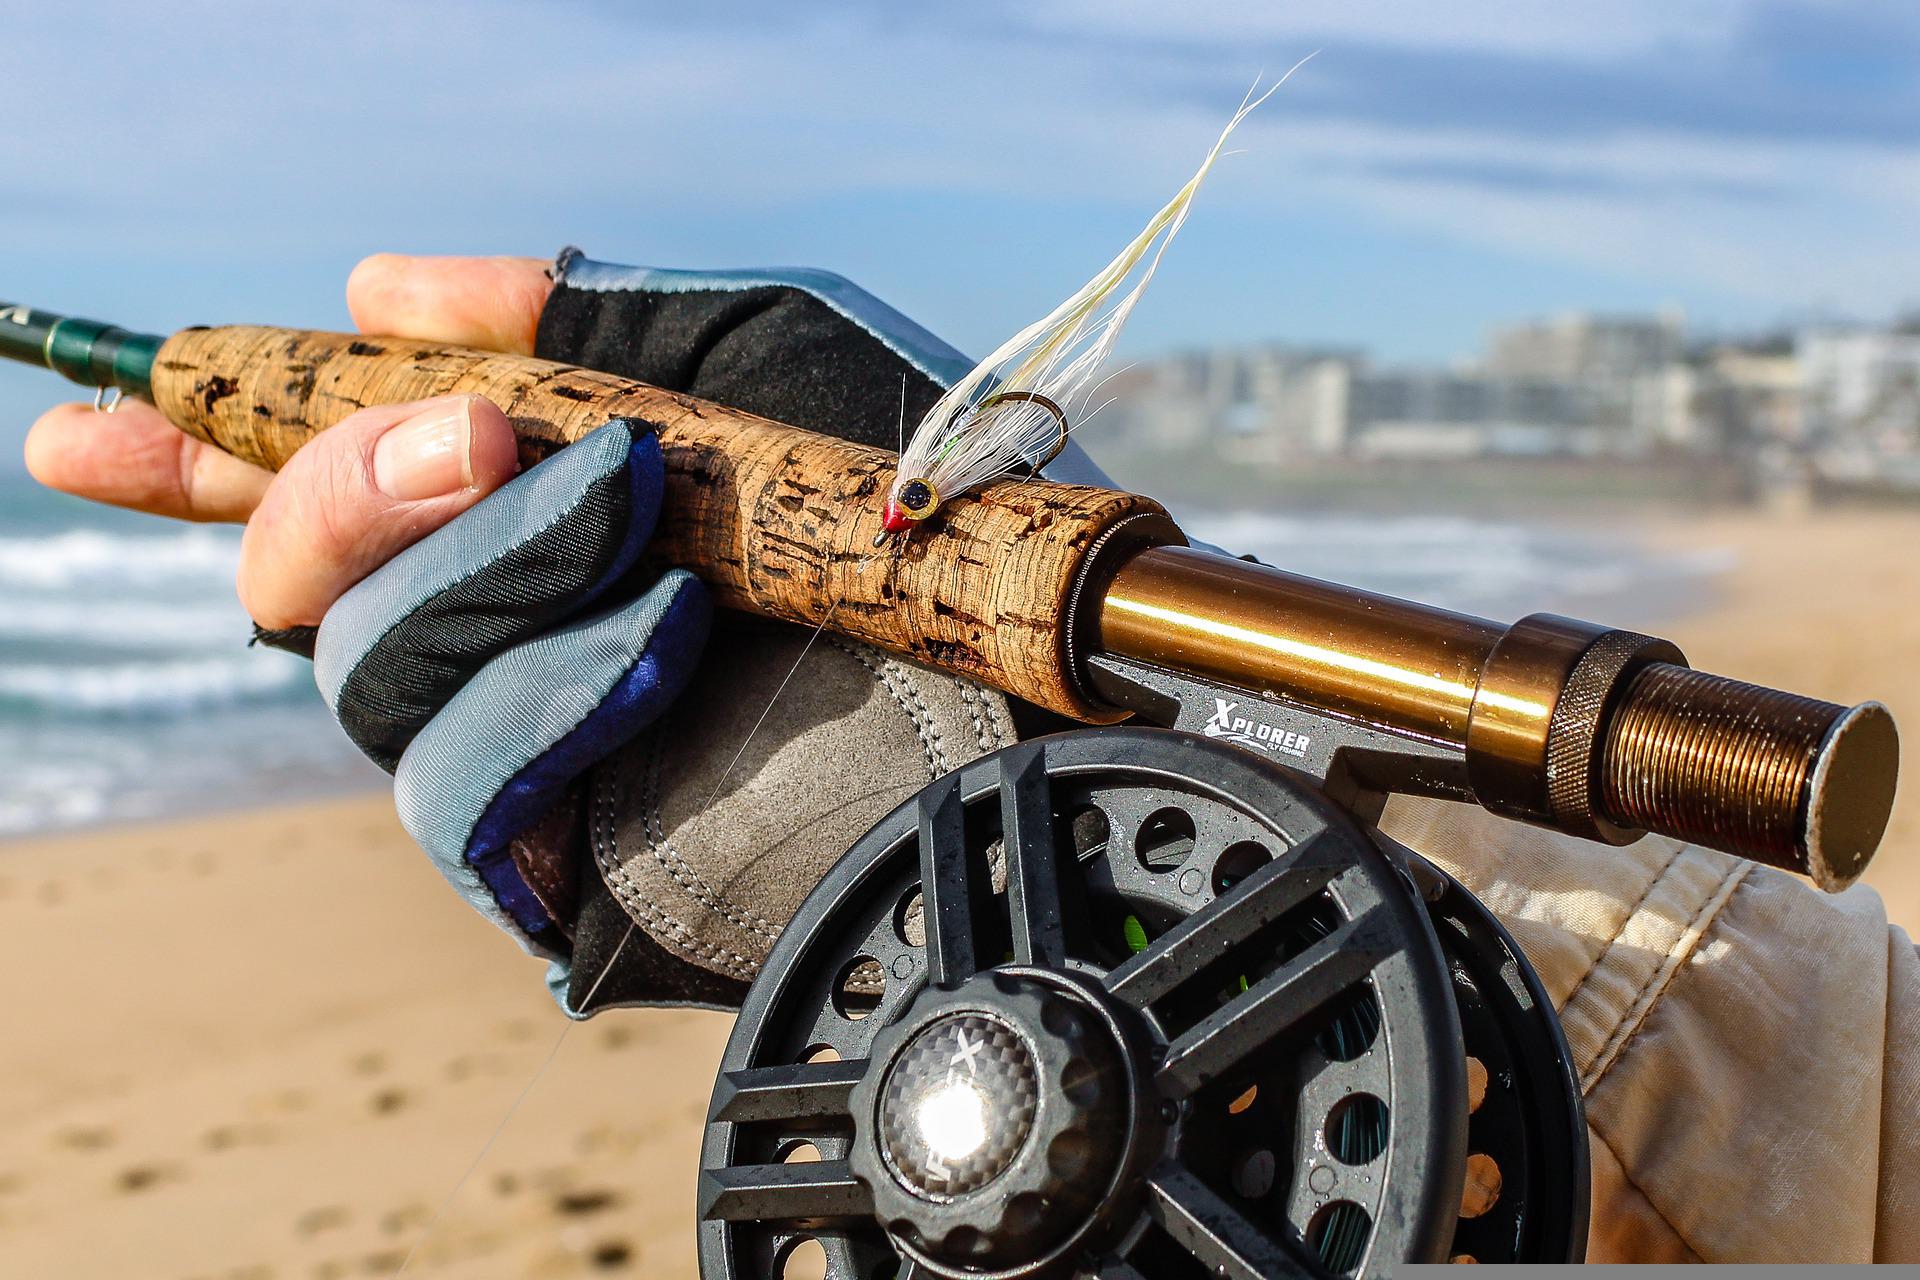 How to Clean Cork Handles on Fishing Rods - Best Way